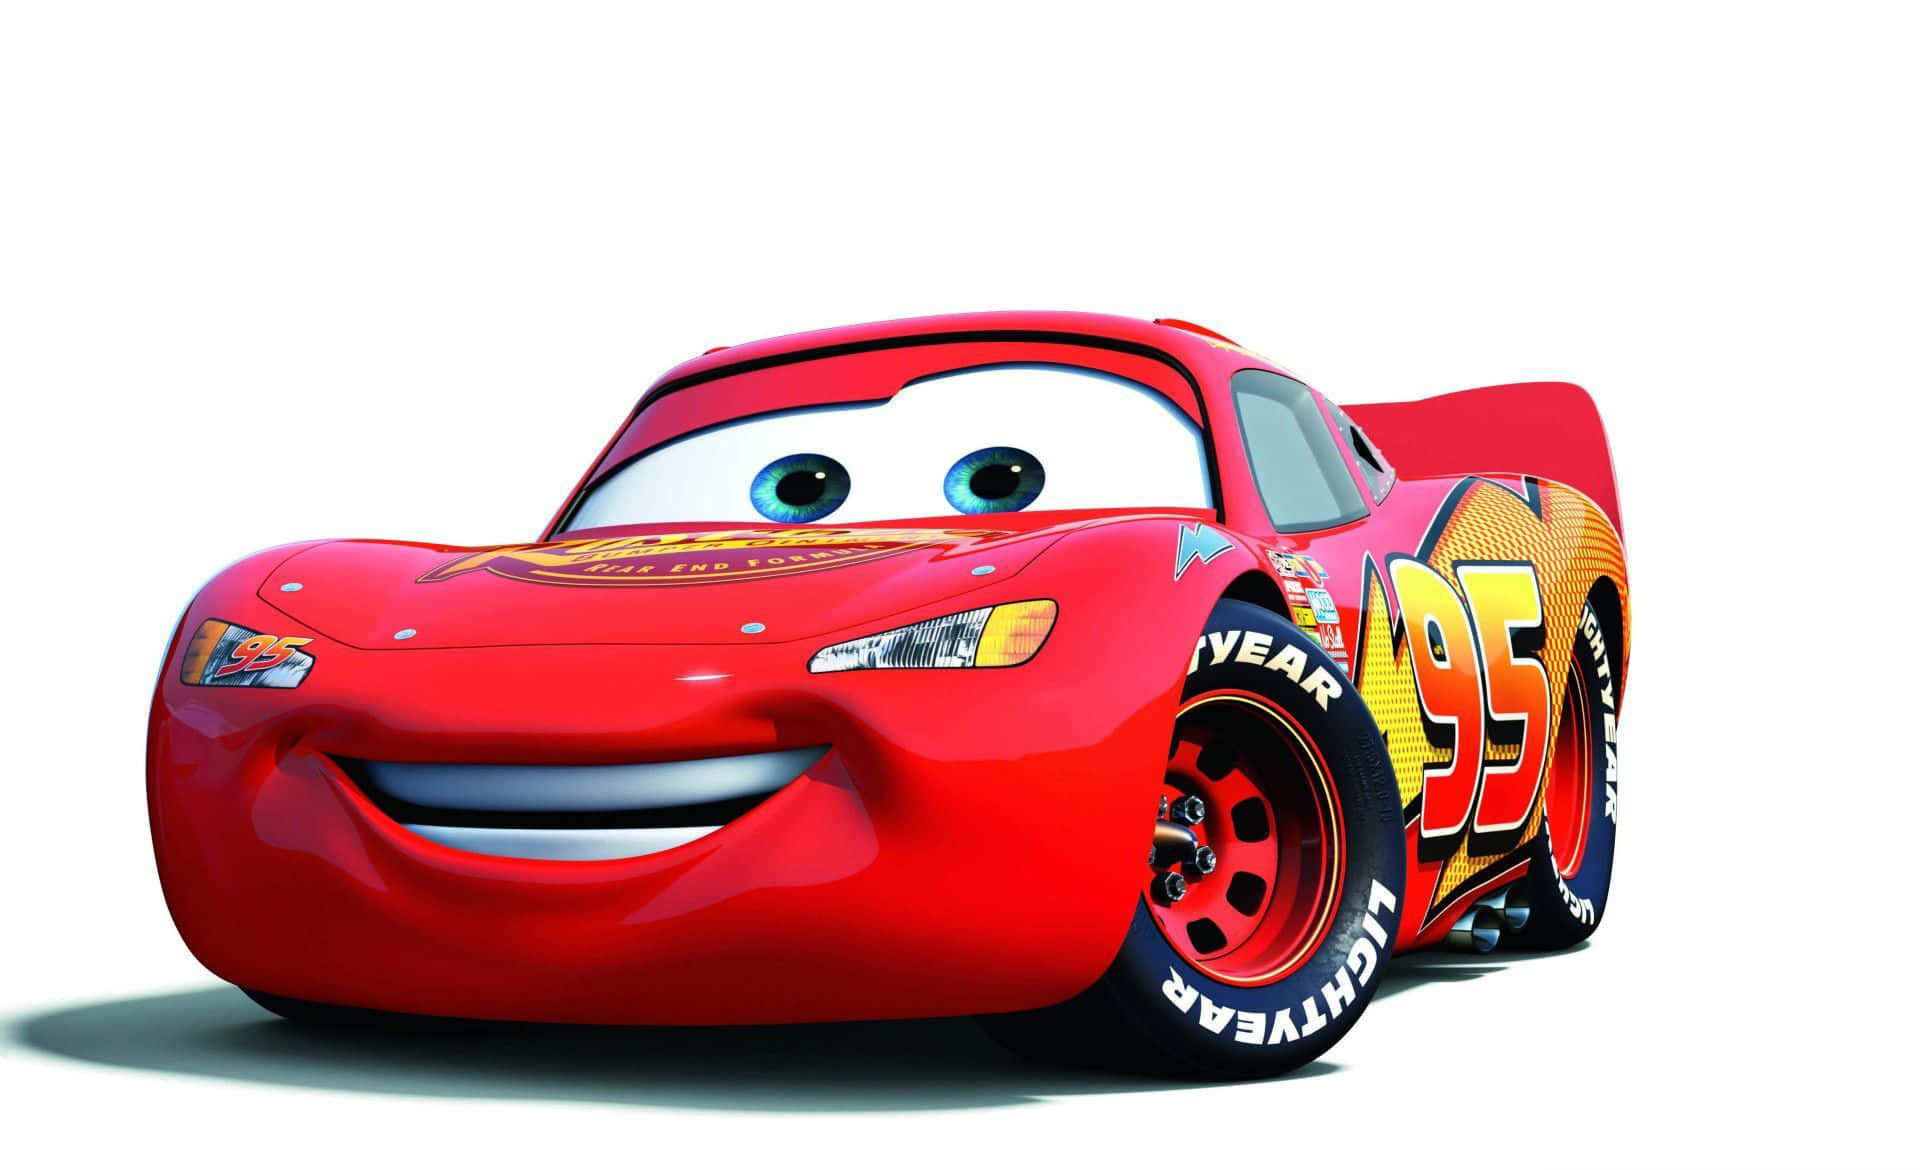 Lightning McQueen speeding down the road with friends